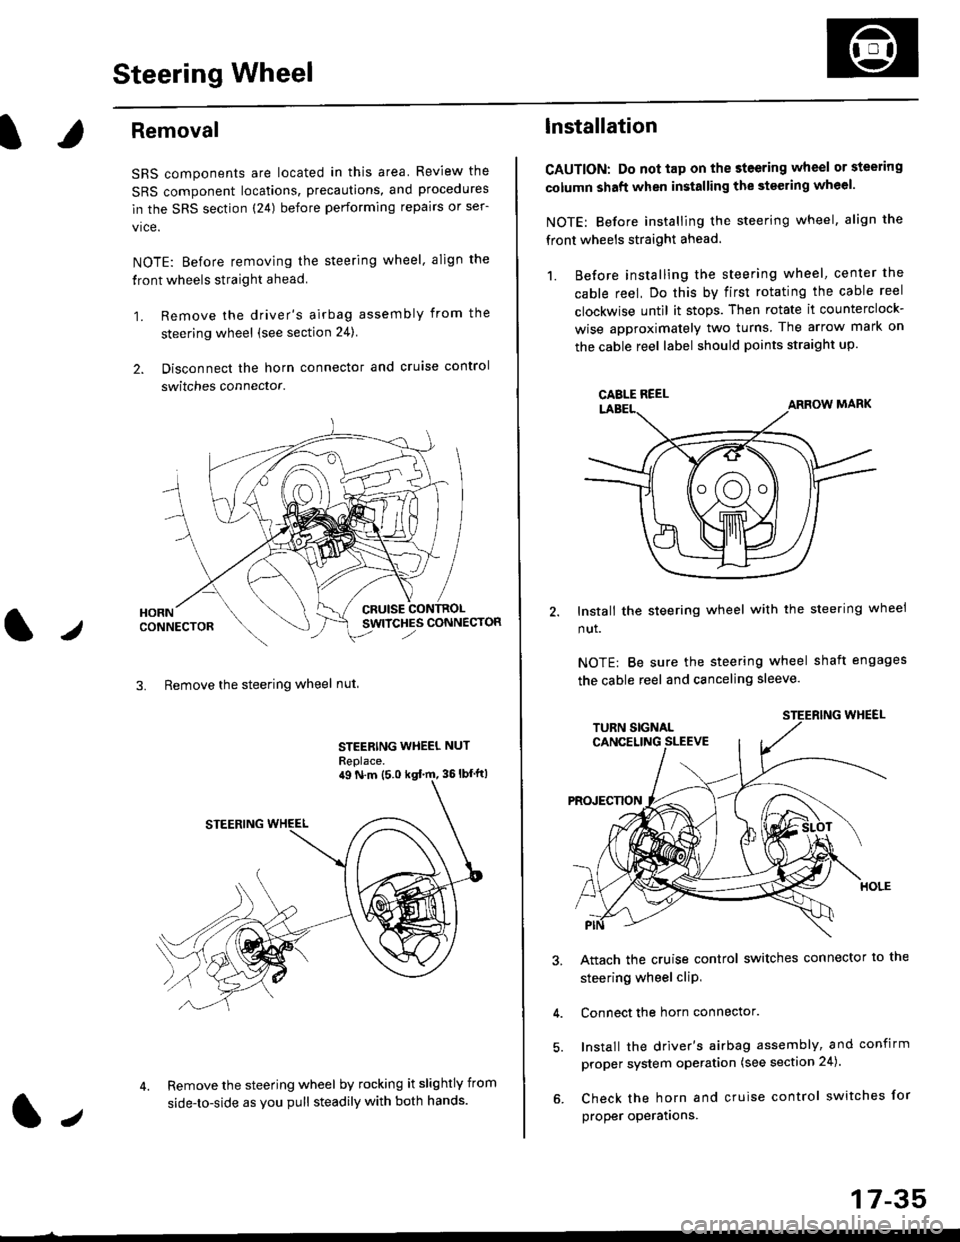 HONDA CIVIC 1999 6.G Workshop Manual Steering Wheel
l,/
Removal
SRS components are located in this area Review the
SRS component locations, precautions, and procedures
in the SRS section (24) before performing repairs or ser-
vice.
NOTE: